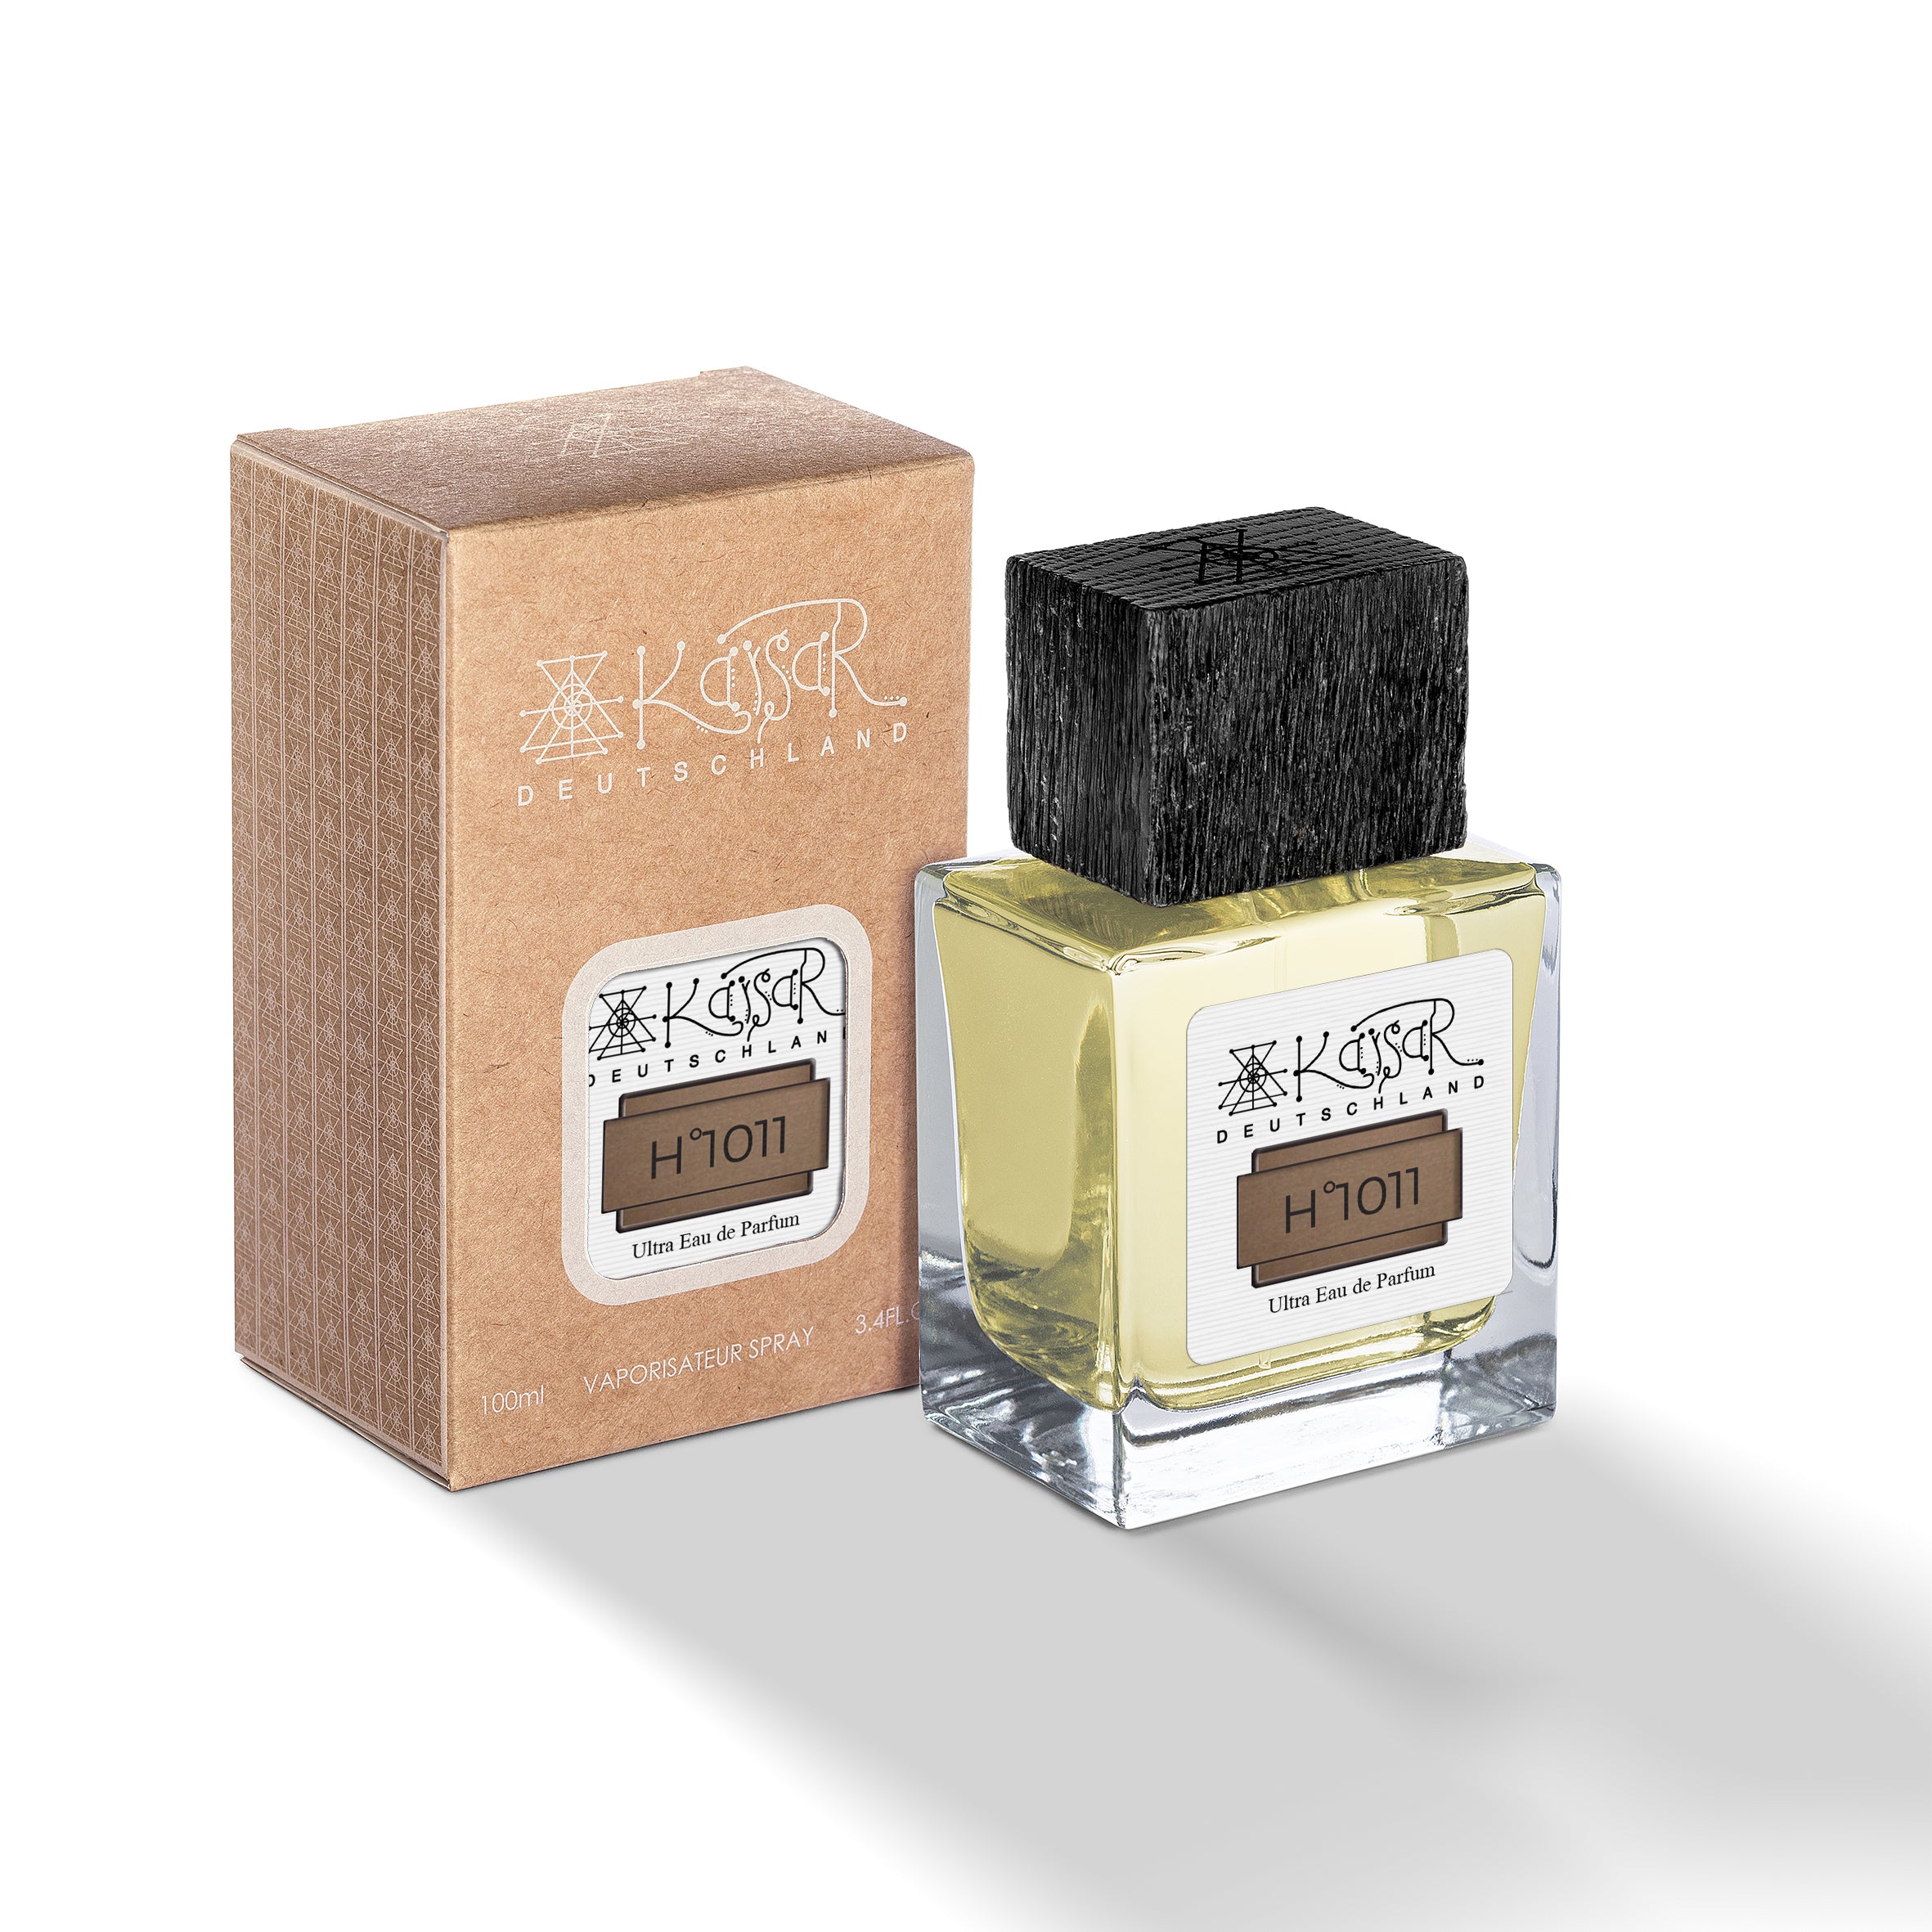 H°1011 Guilty Man Absolute Scent